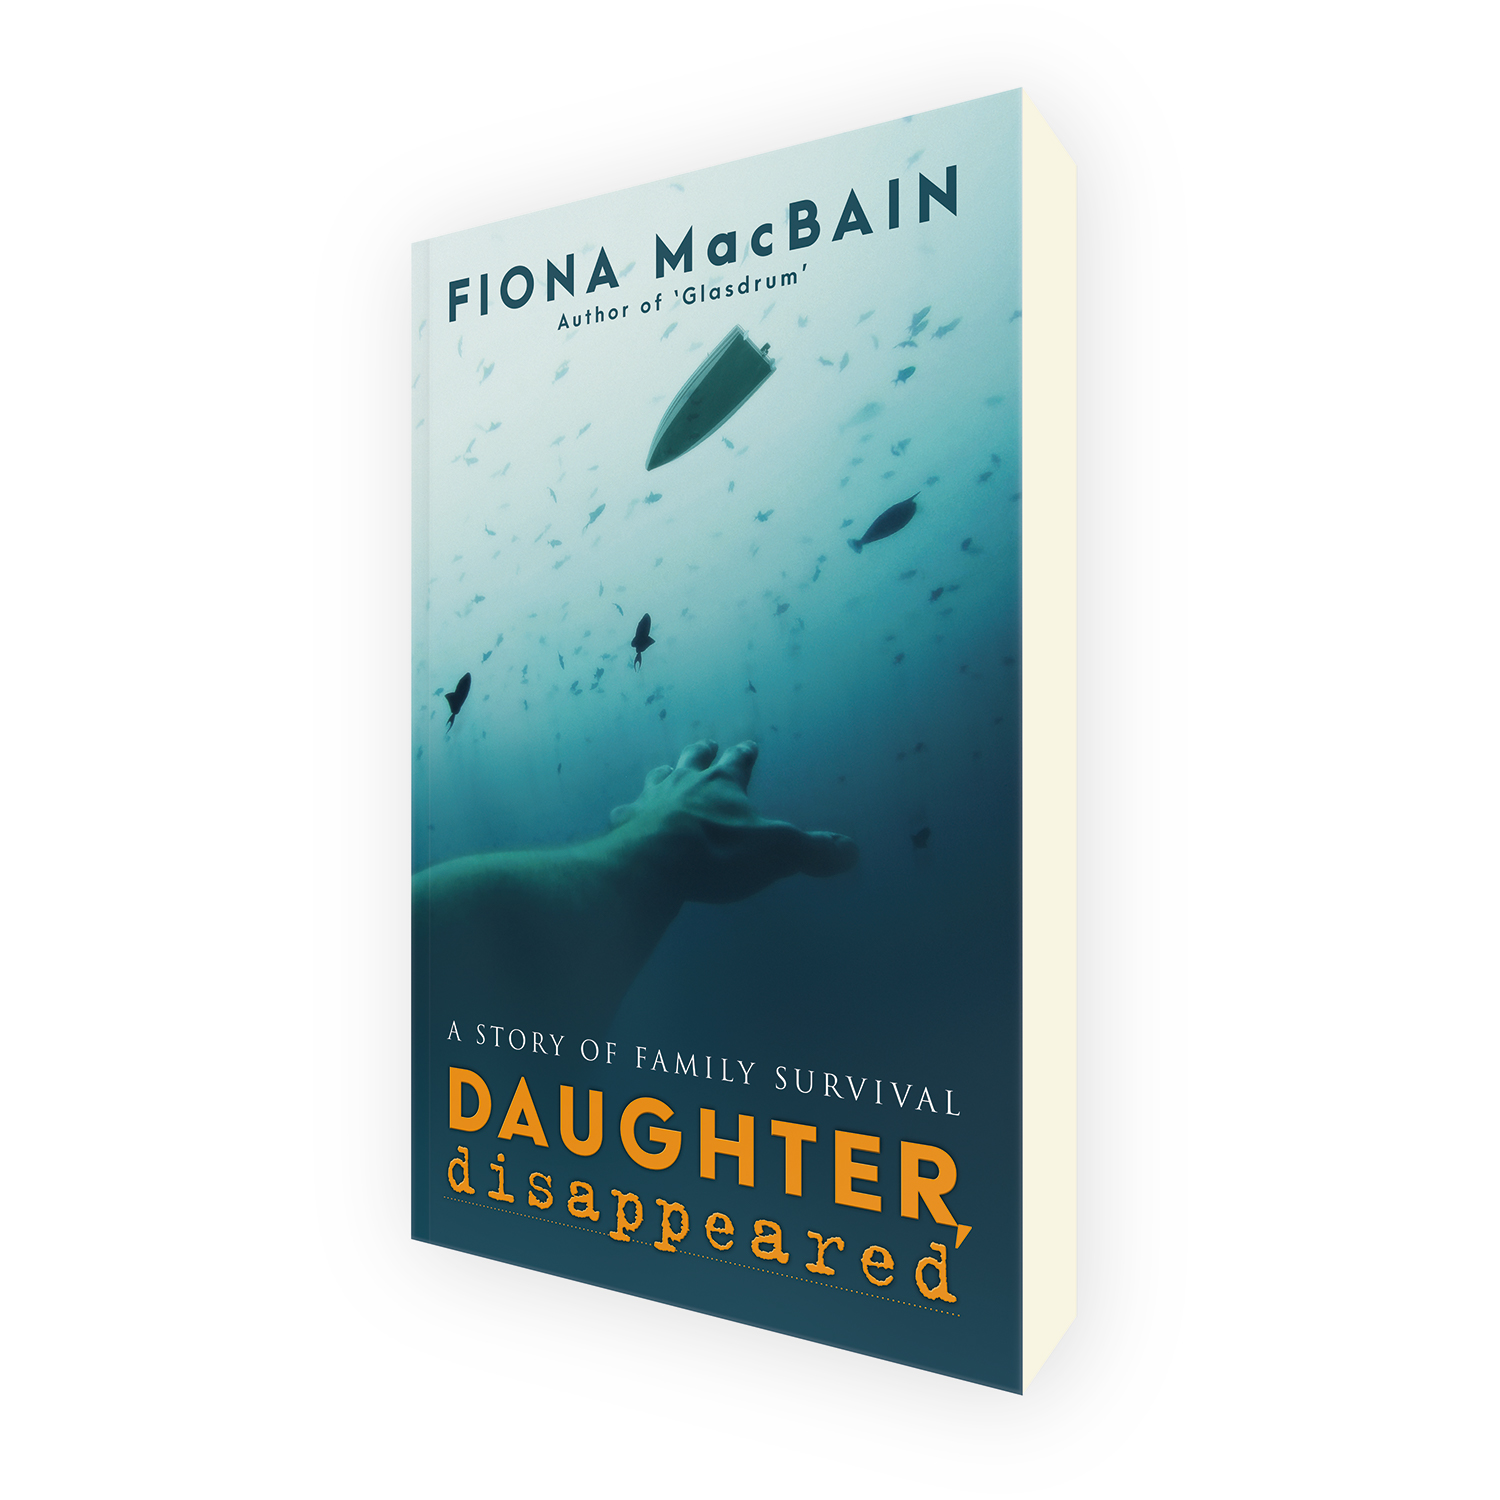 'Daughter, Disappeared' is a Tunisian-set dramatic novel, by author Fiona MacBain. The book cover & interior were designed by Mark Thomas, of coverness.com. To find out more about my book design services, please visit www.coverness.com.